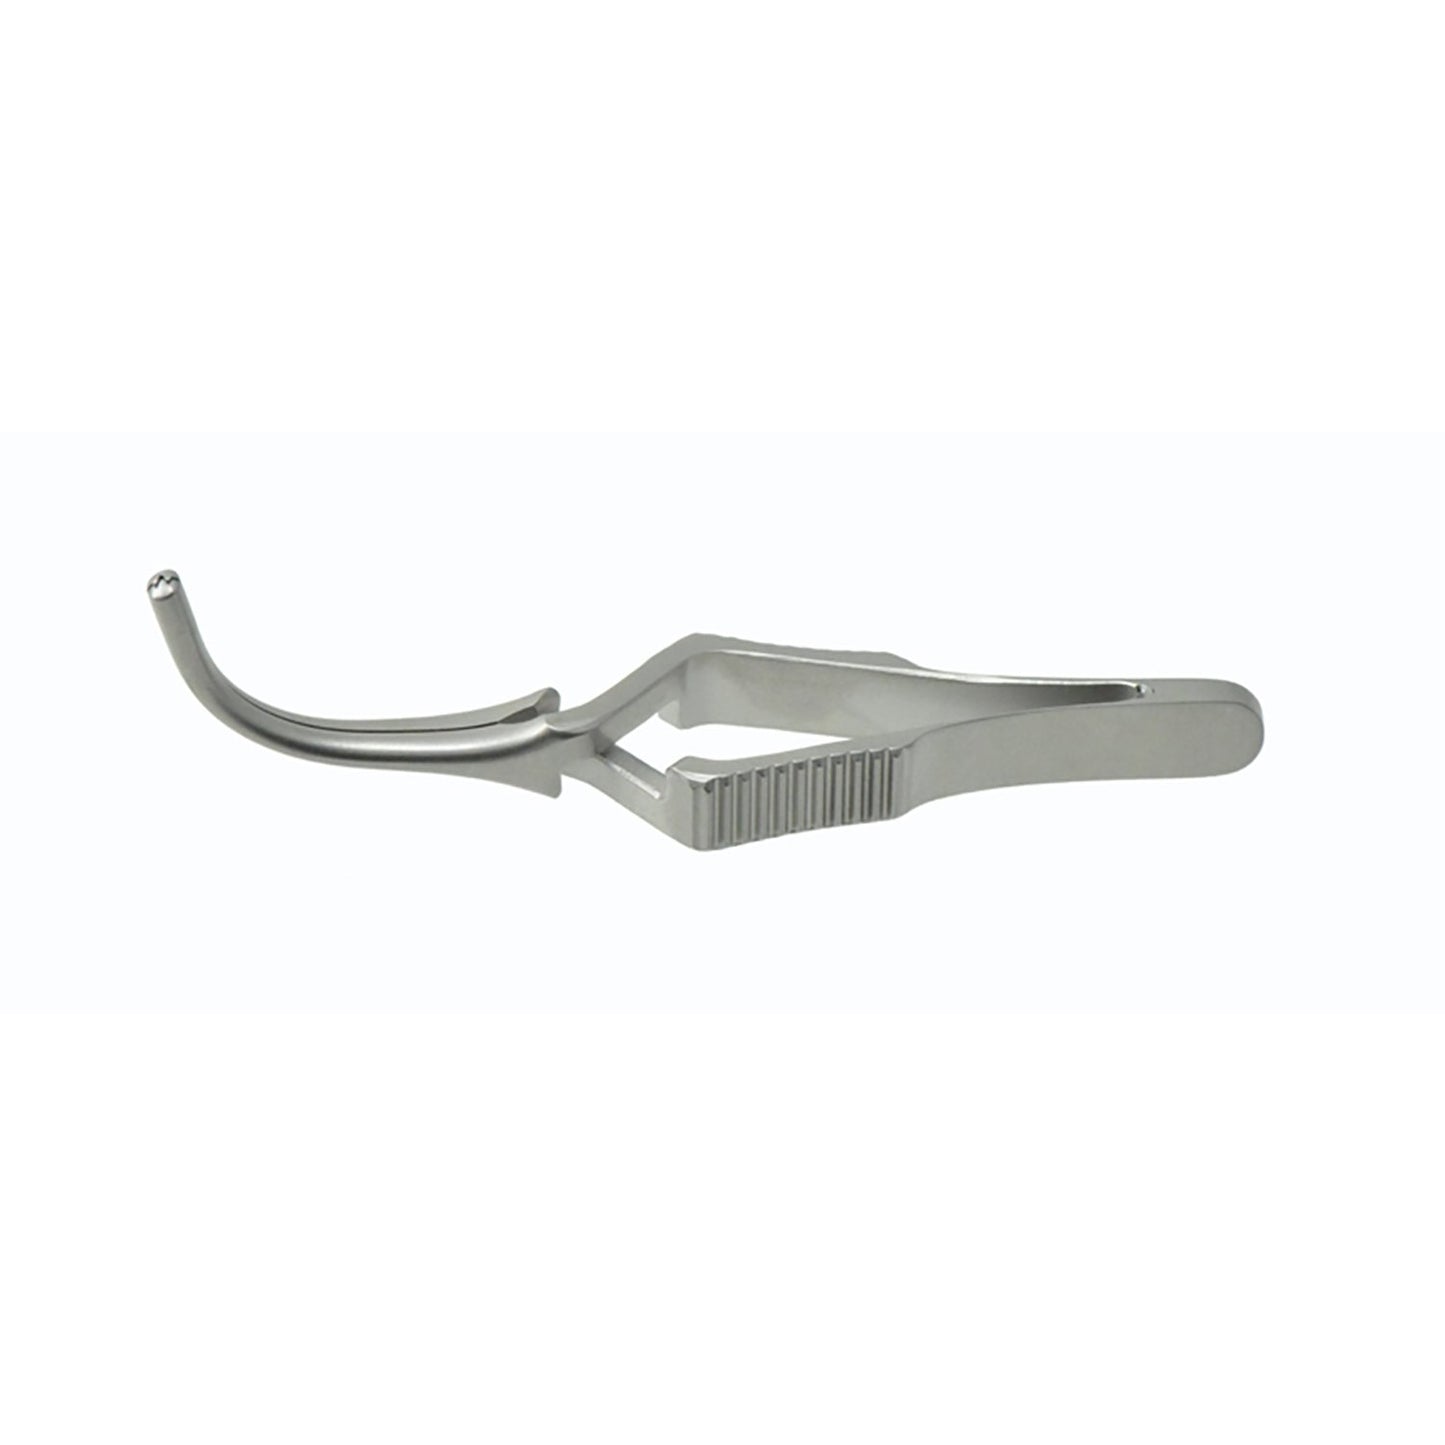 Debakey Cross Action Bulldog Clamps Curved